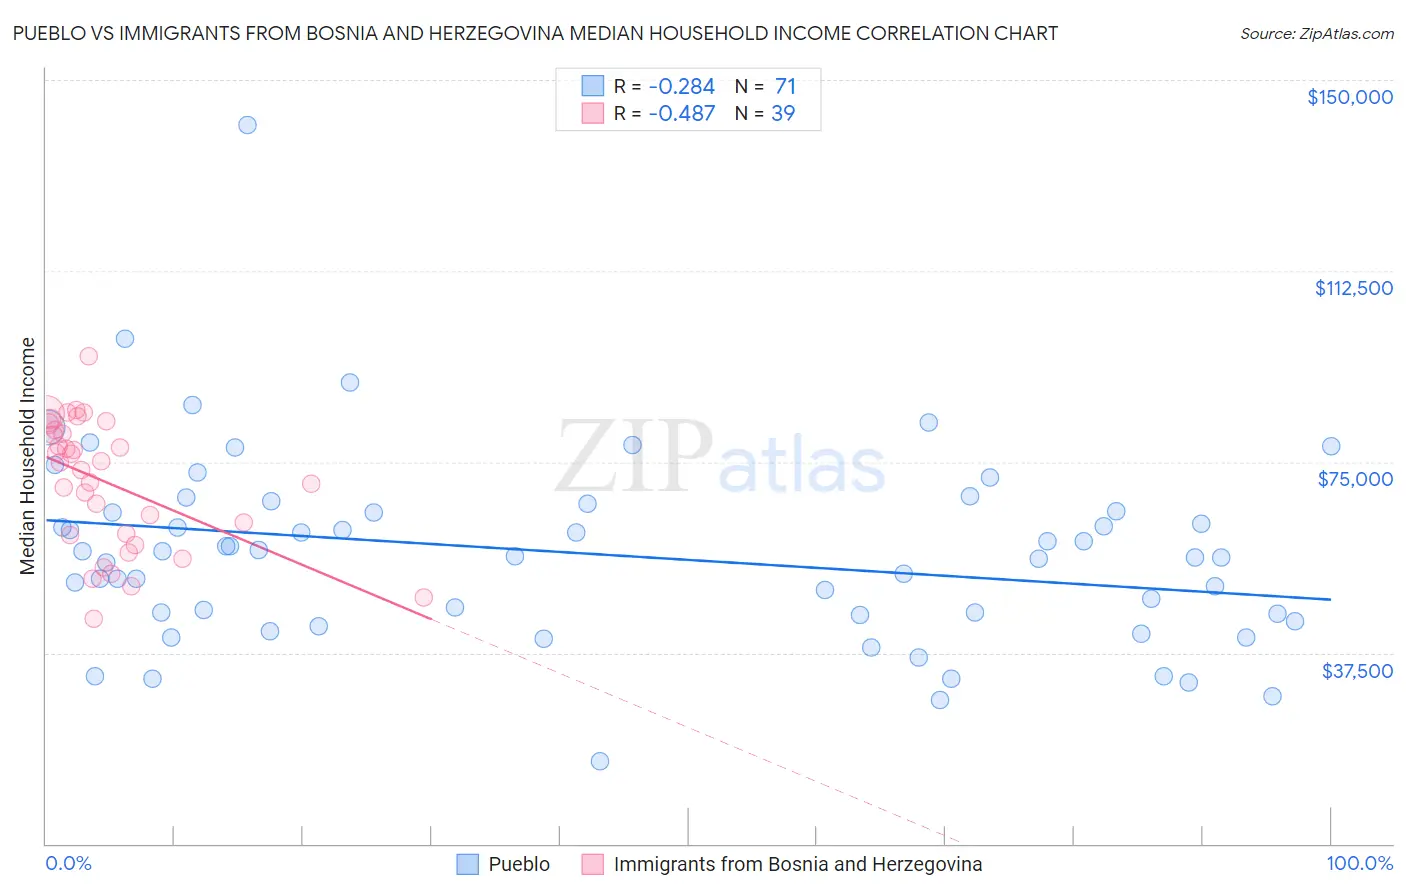 Pueblo vs Immigrants from Bosnia and Herzegovina Median Household Income